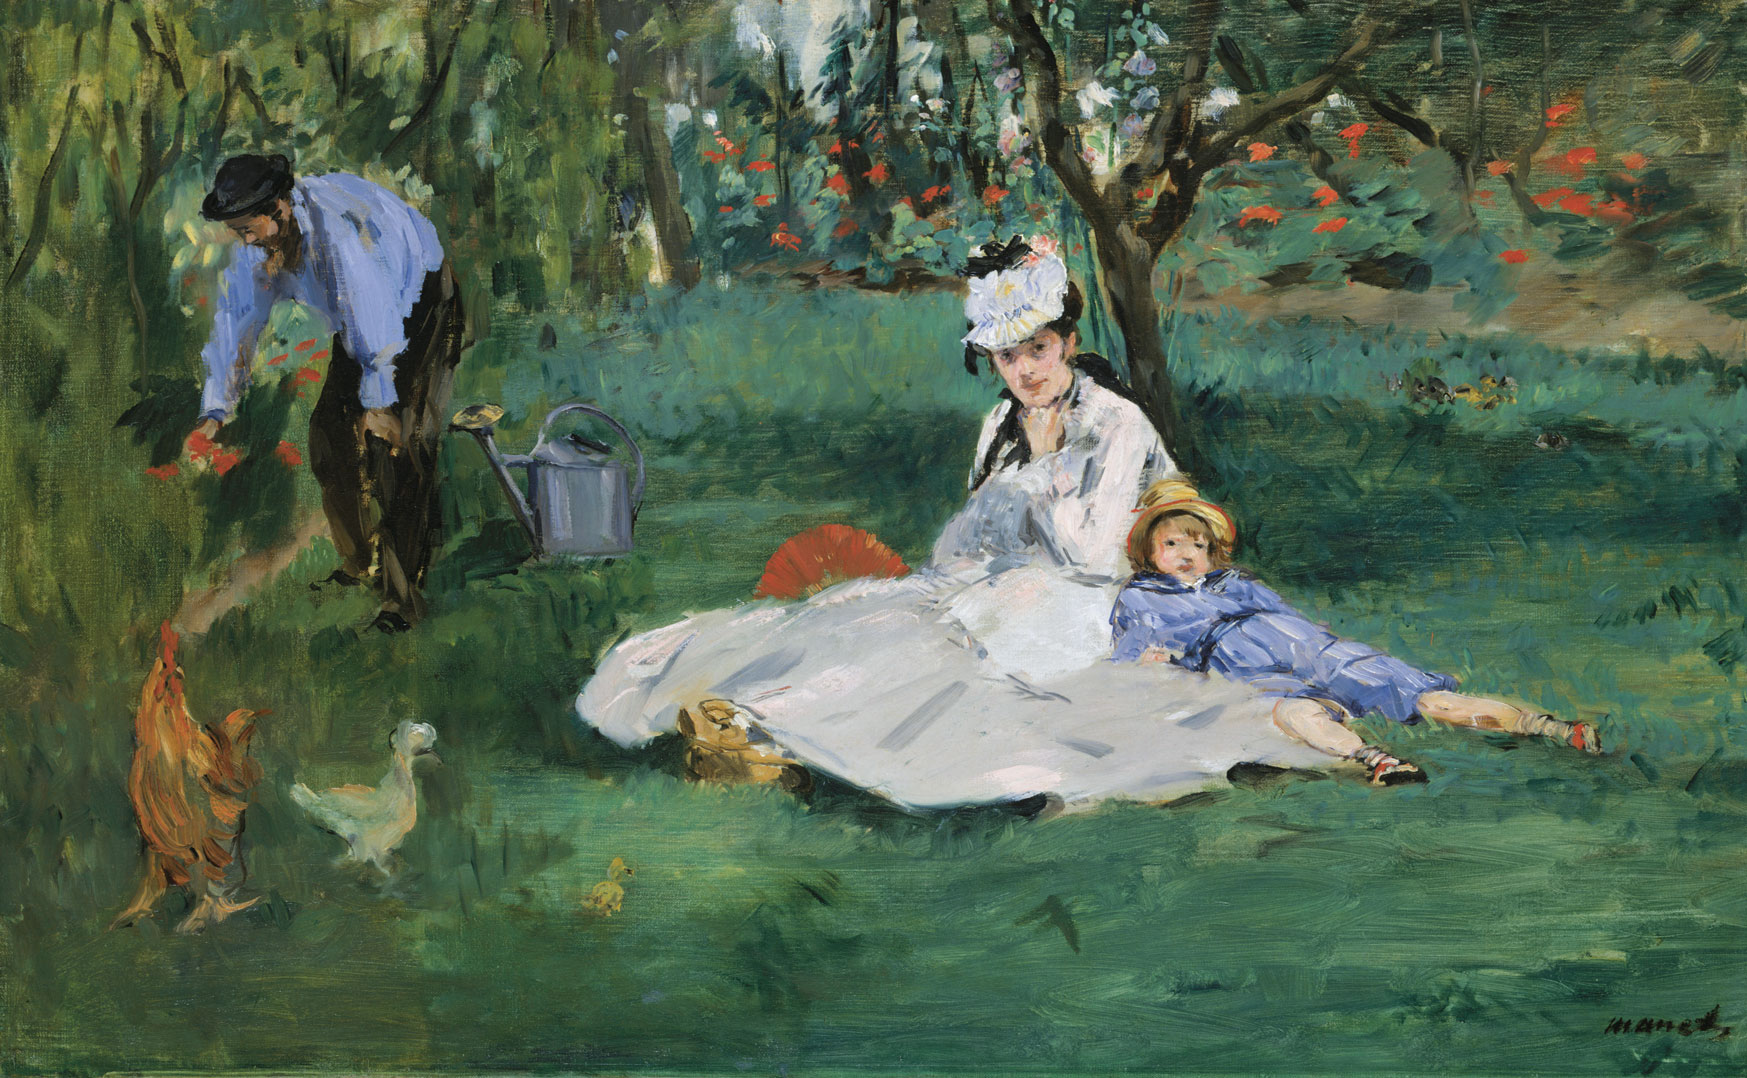 Lots of women and children, obviously, but there is one lovely little Impressionist painting by Manet of the Monet family in their garden. From Art =